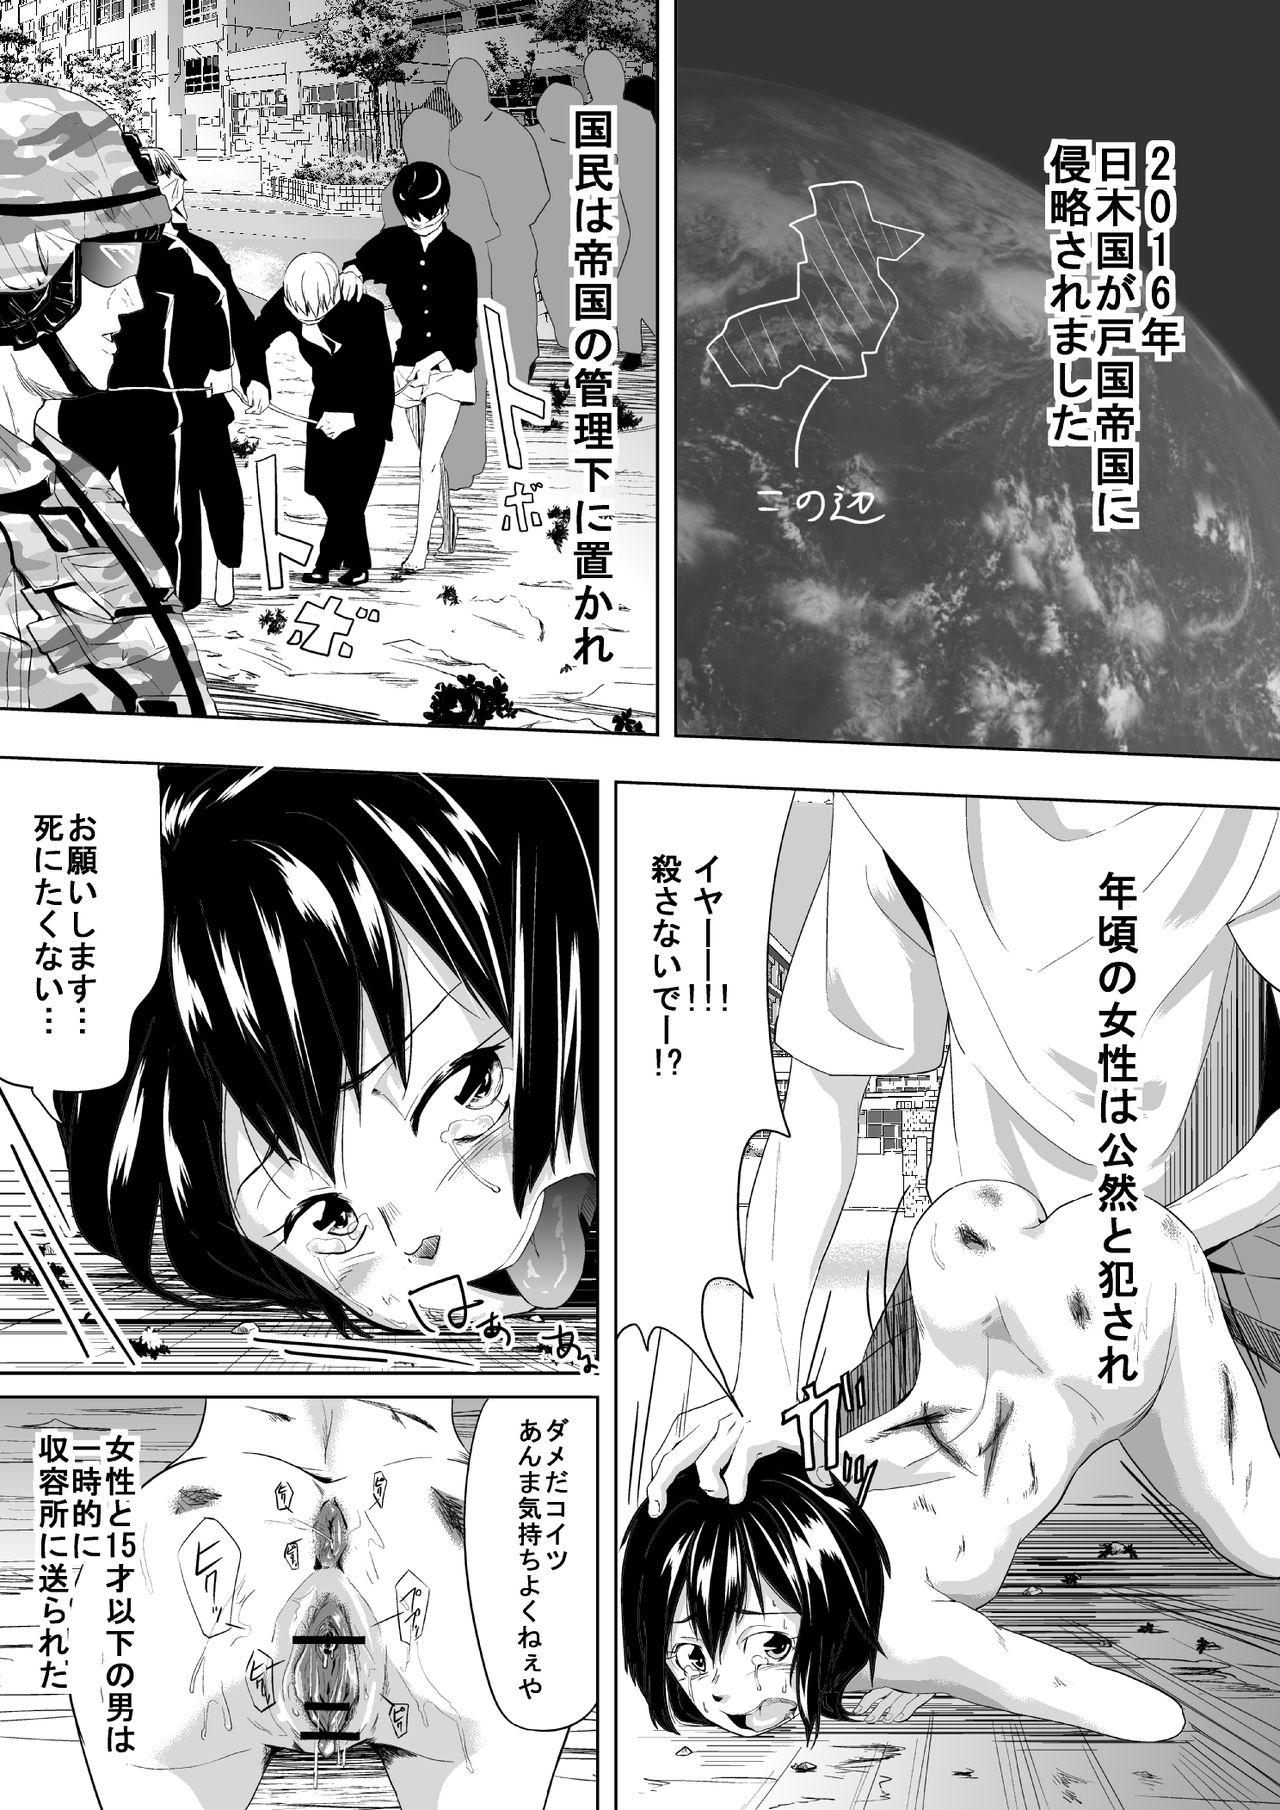 Blow こんな世界は嫌だ Passionate - Page 6